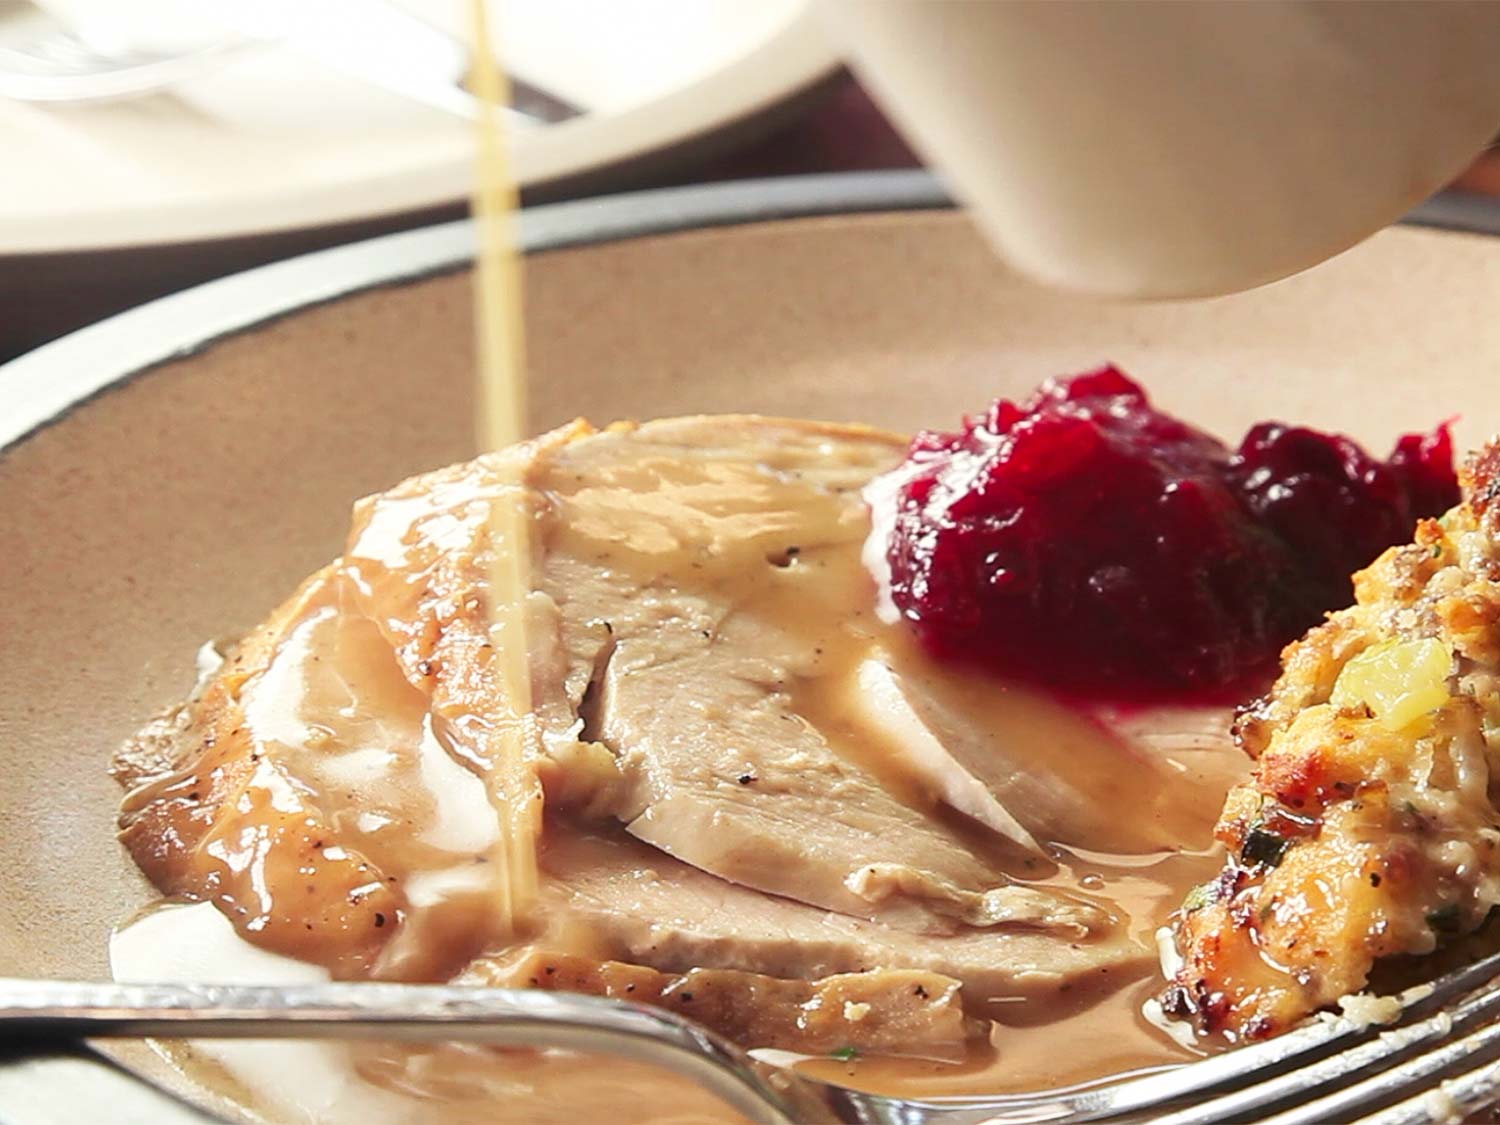 Slices of roast turkey being drizzled with gravy